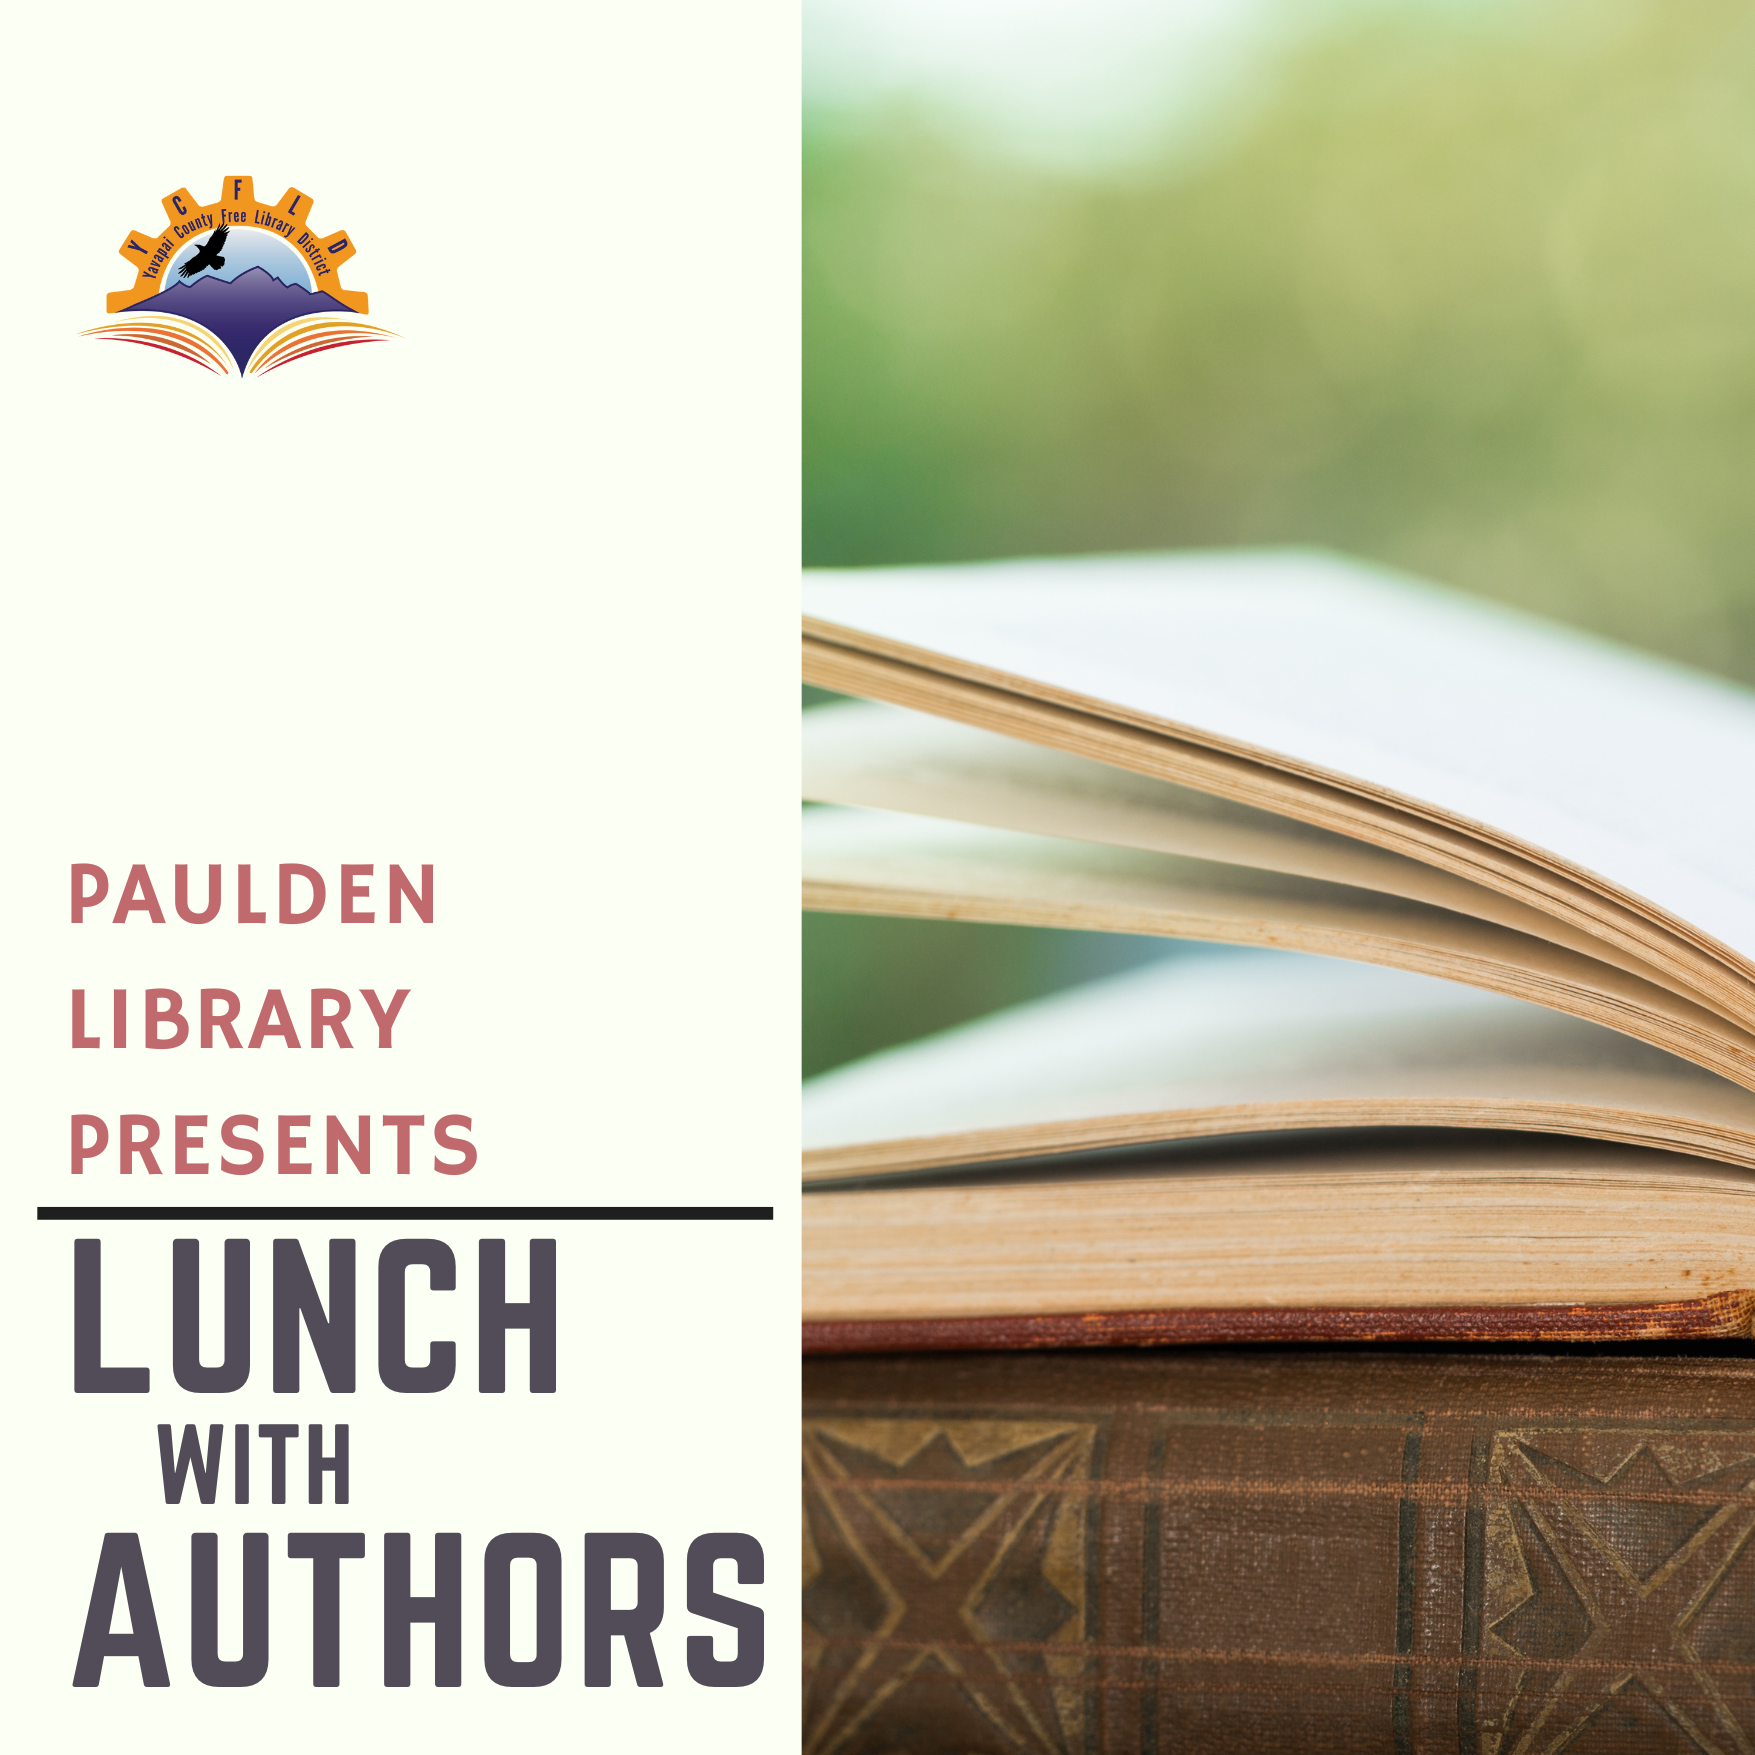 Two books on a green background, words on a white background that say, "Paulden Library Presents Lunch with Authors"